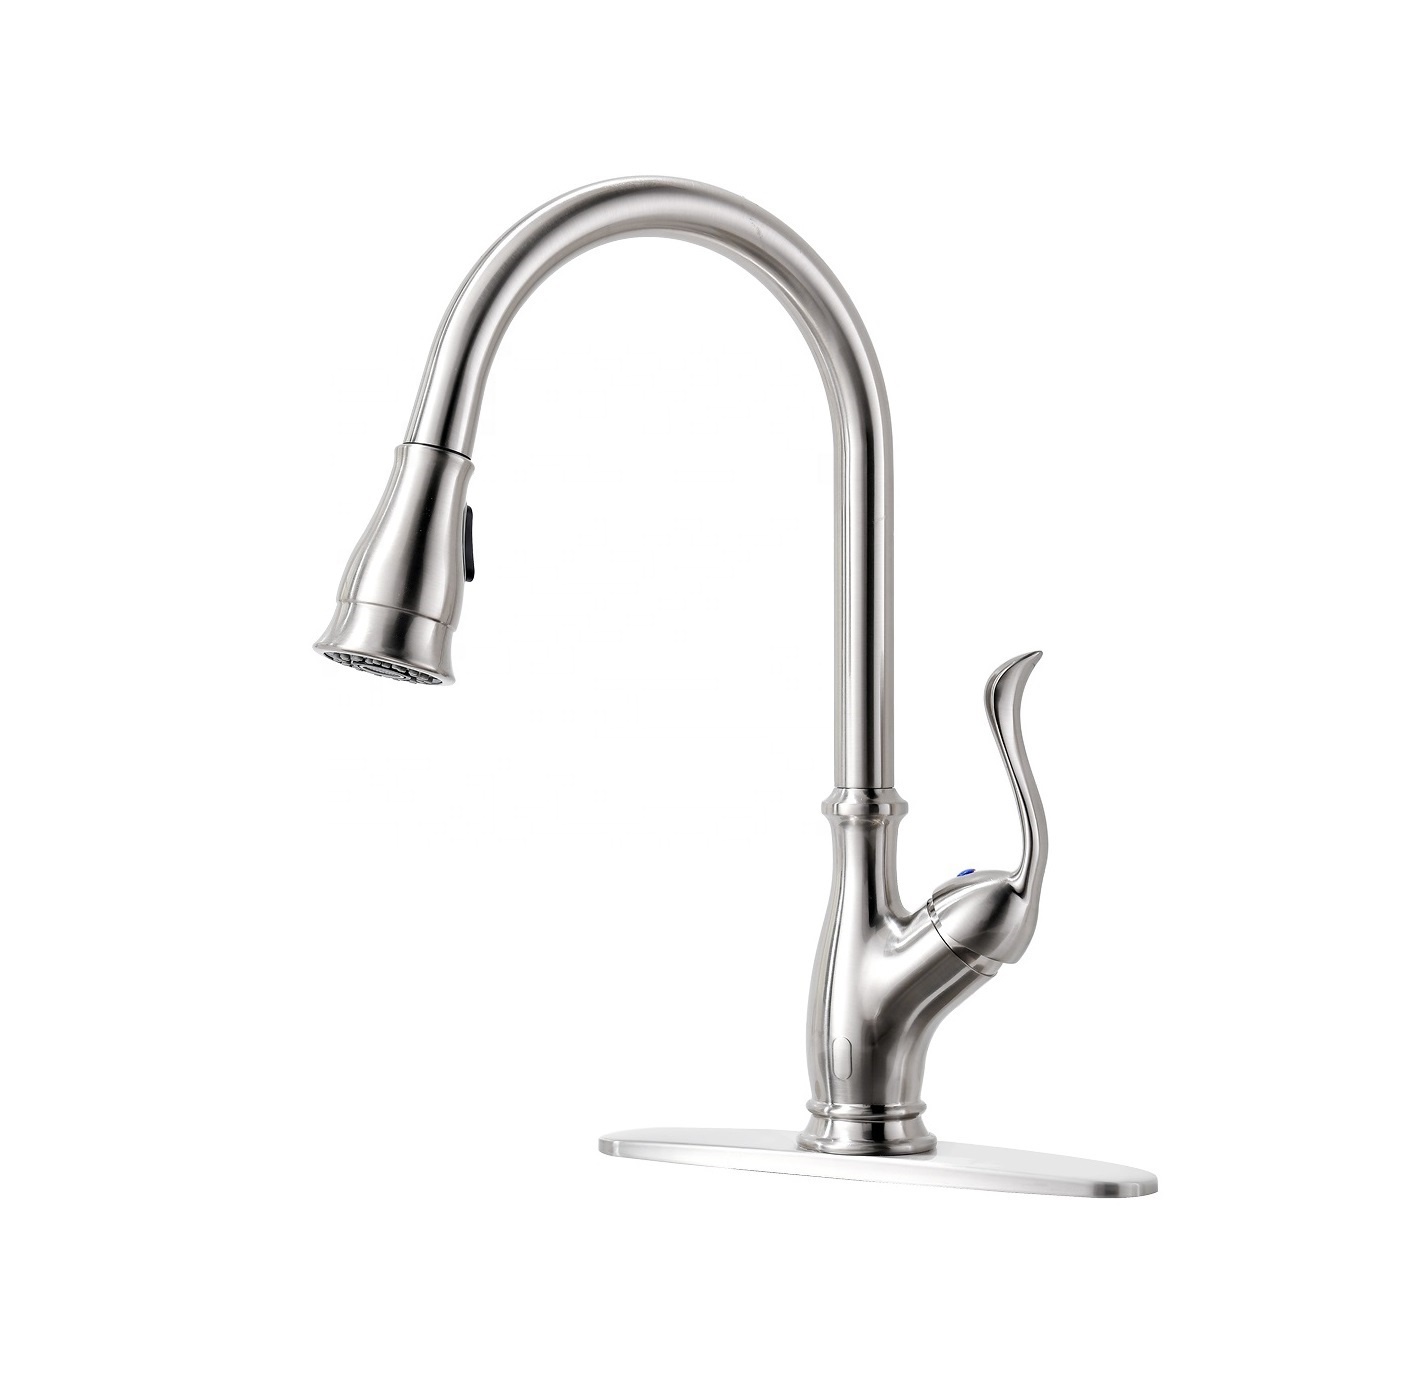 APS170-BN Faucet CUPC Pull-Down Kitchen Sink Faucet Brushed Nickel Swan Kitchen Faucet